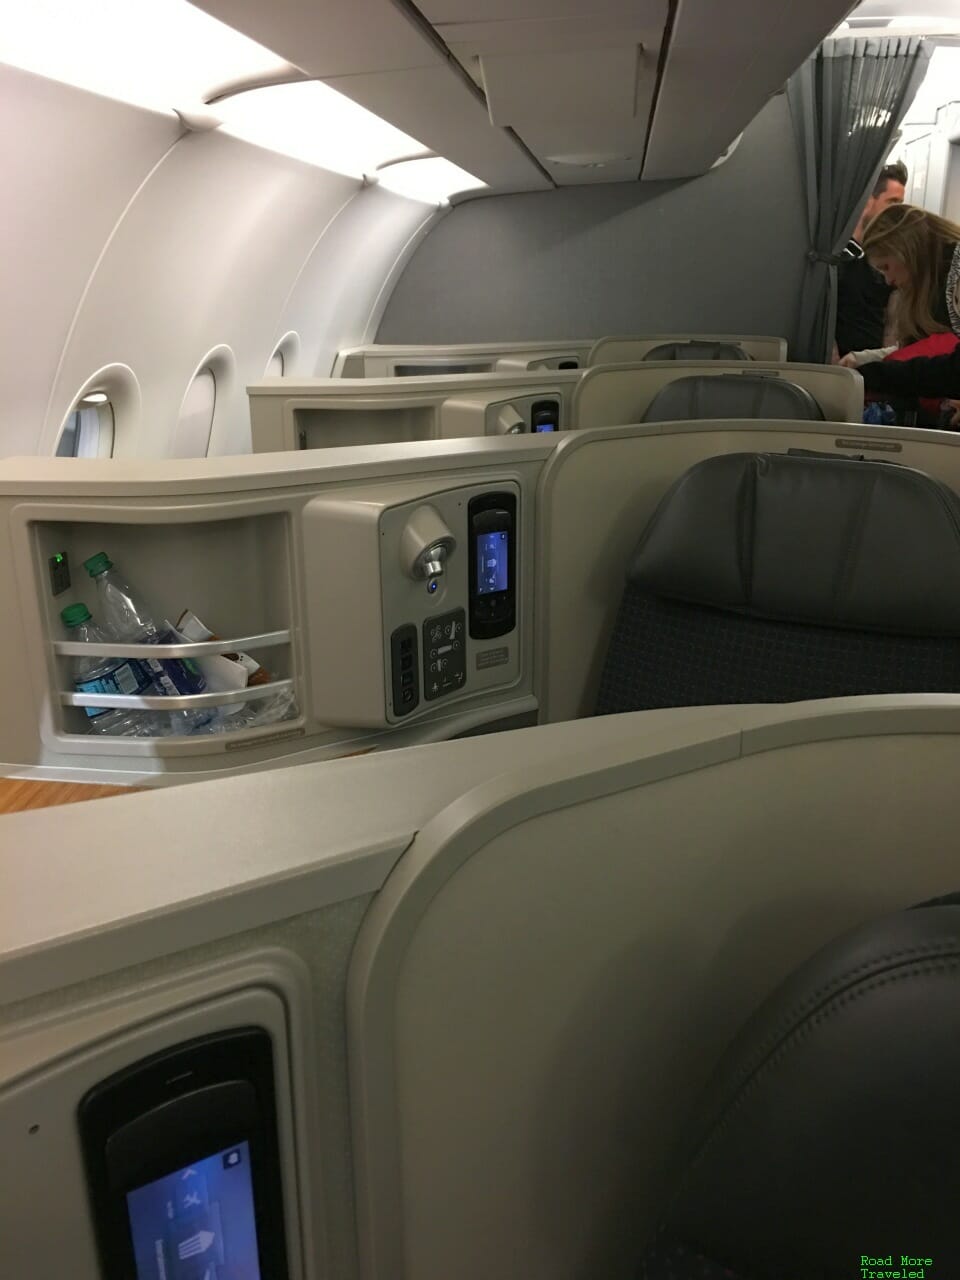 Domestic premium transcontinental products - AA 321T First Class interior